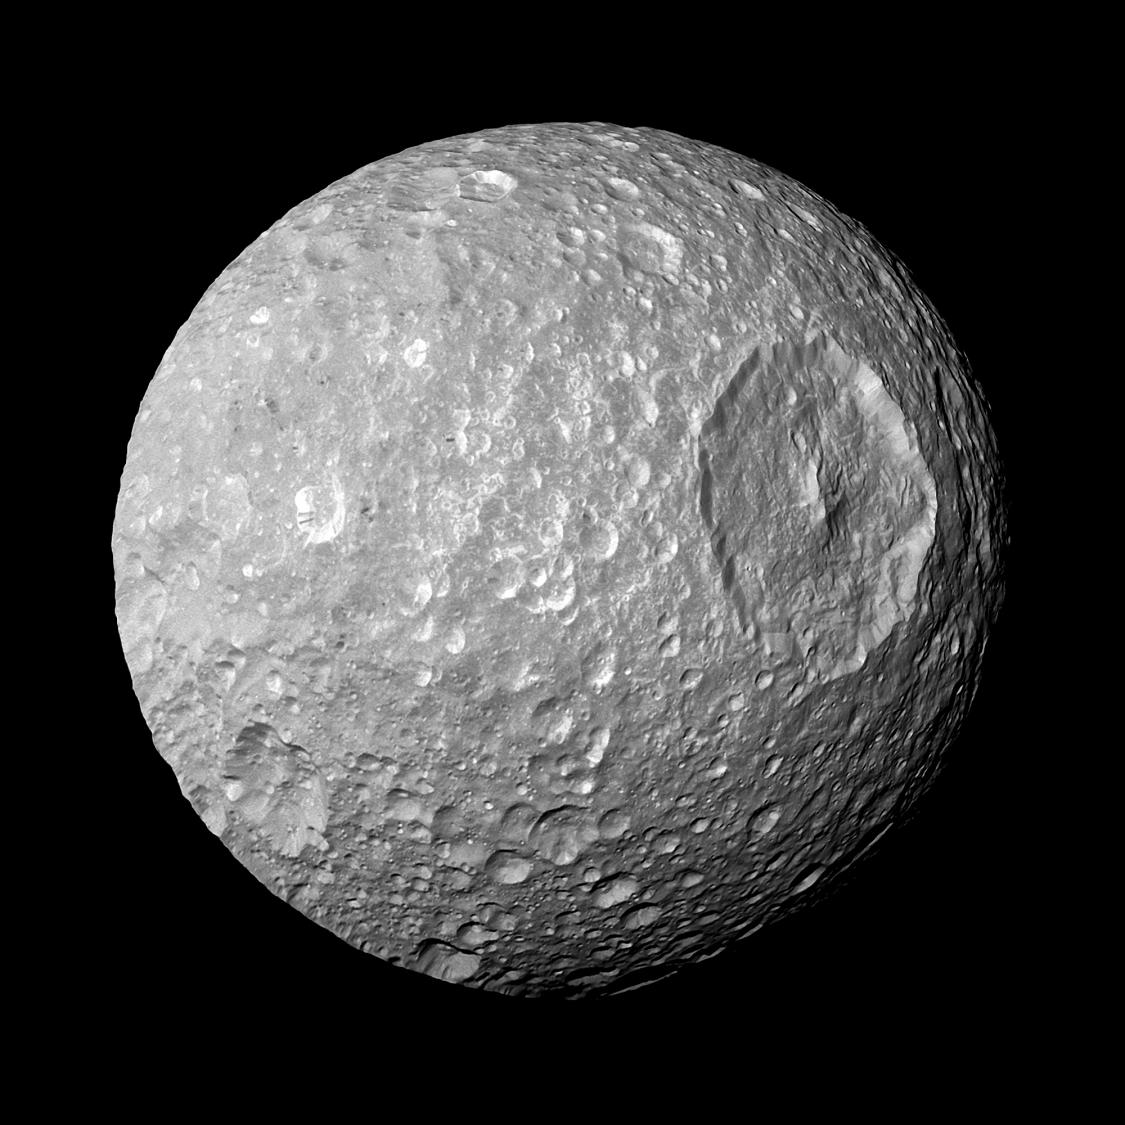 It is possible that Saturn's moon, which resembles the Death Star, has a large ocean located beneath its surface.